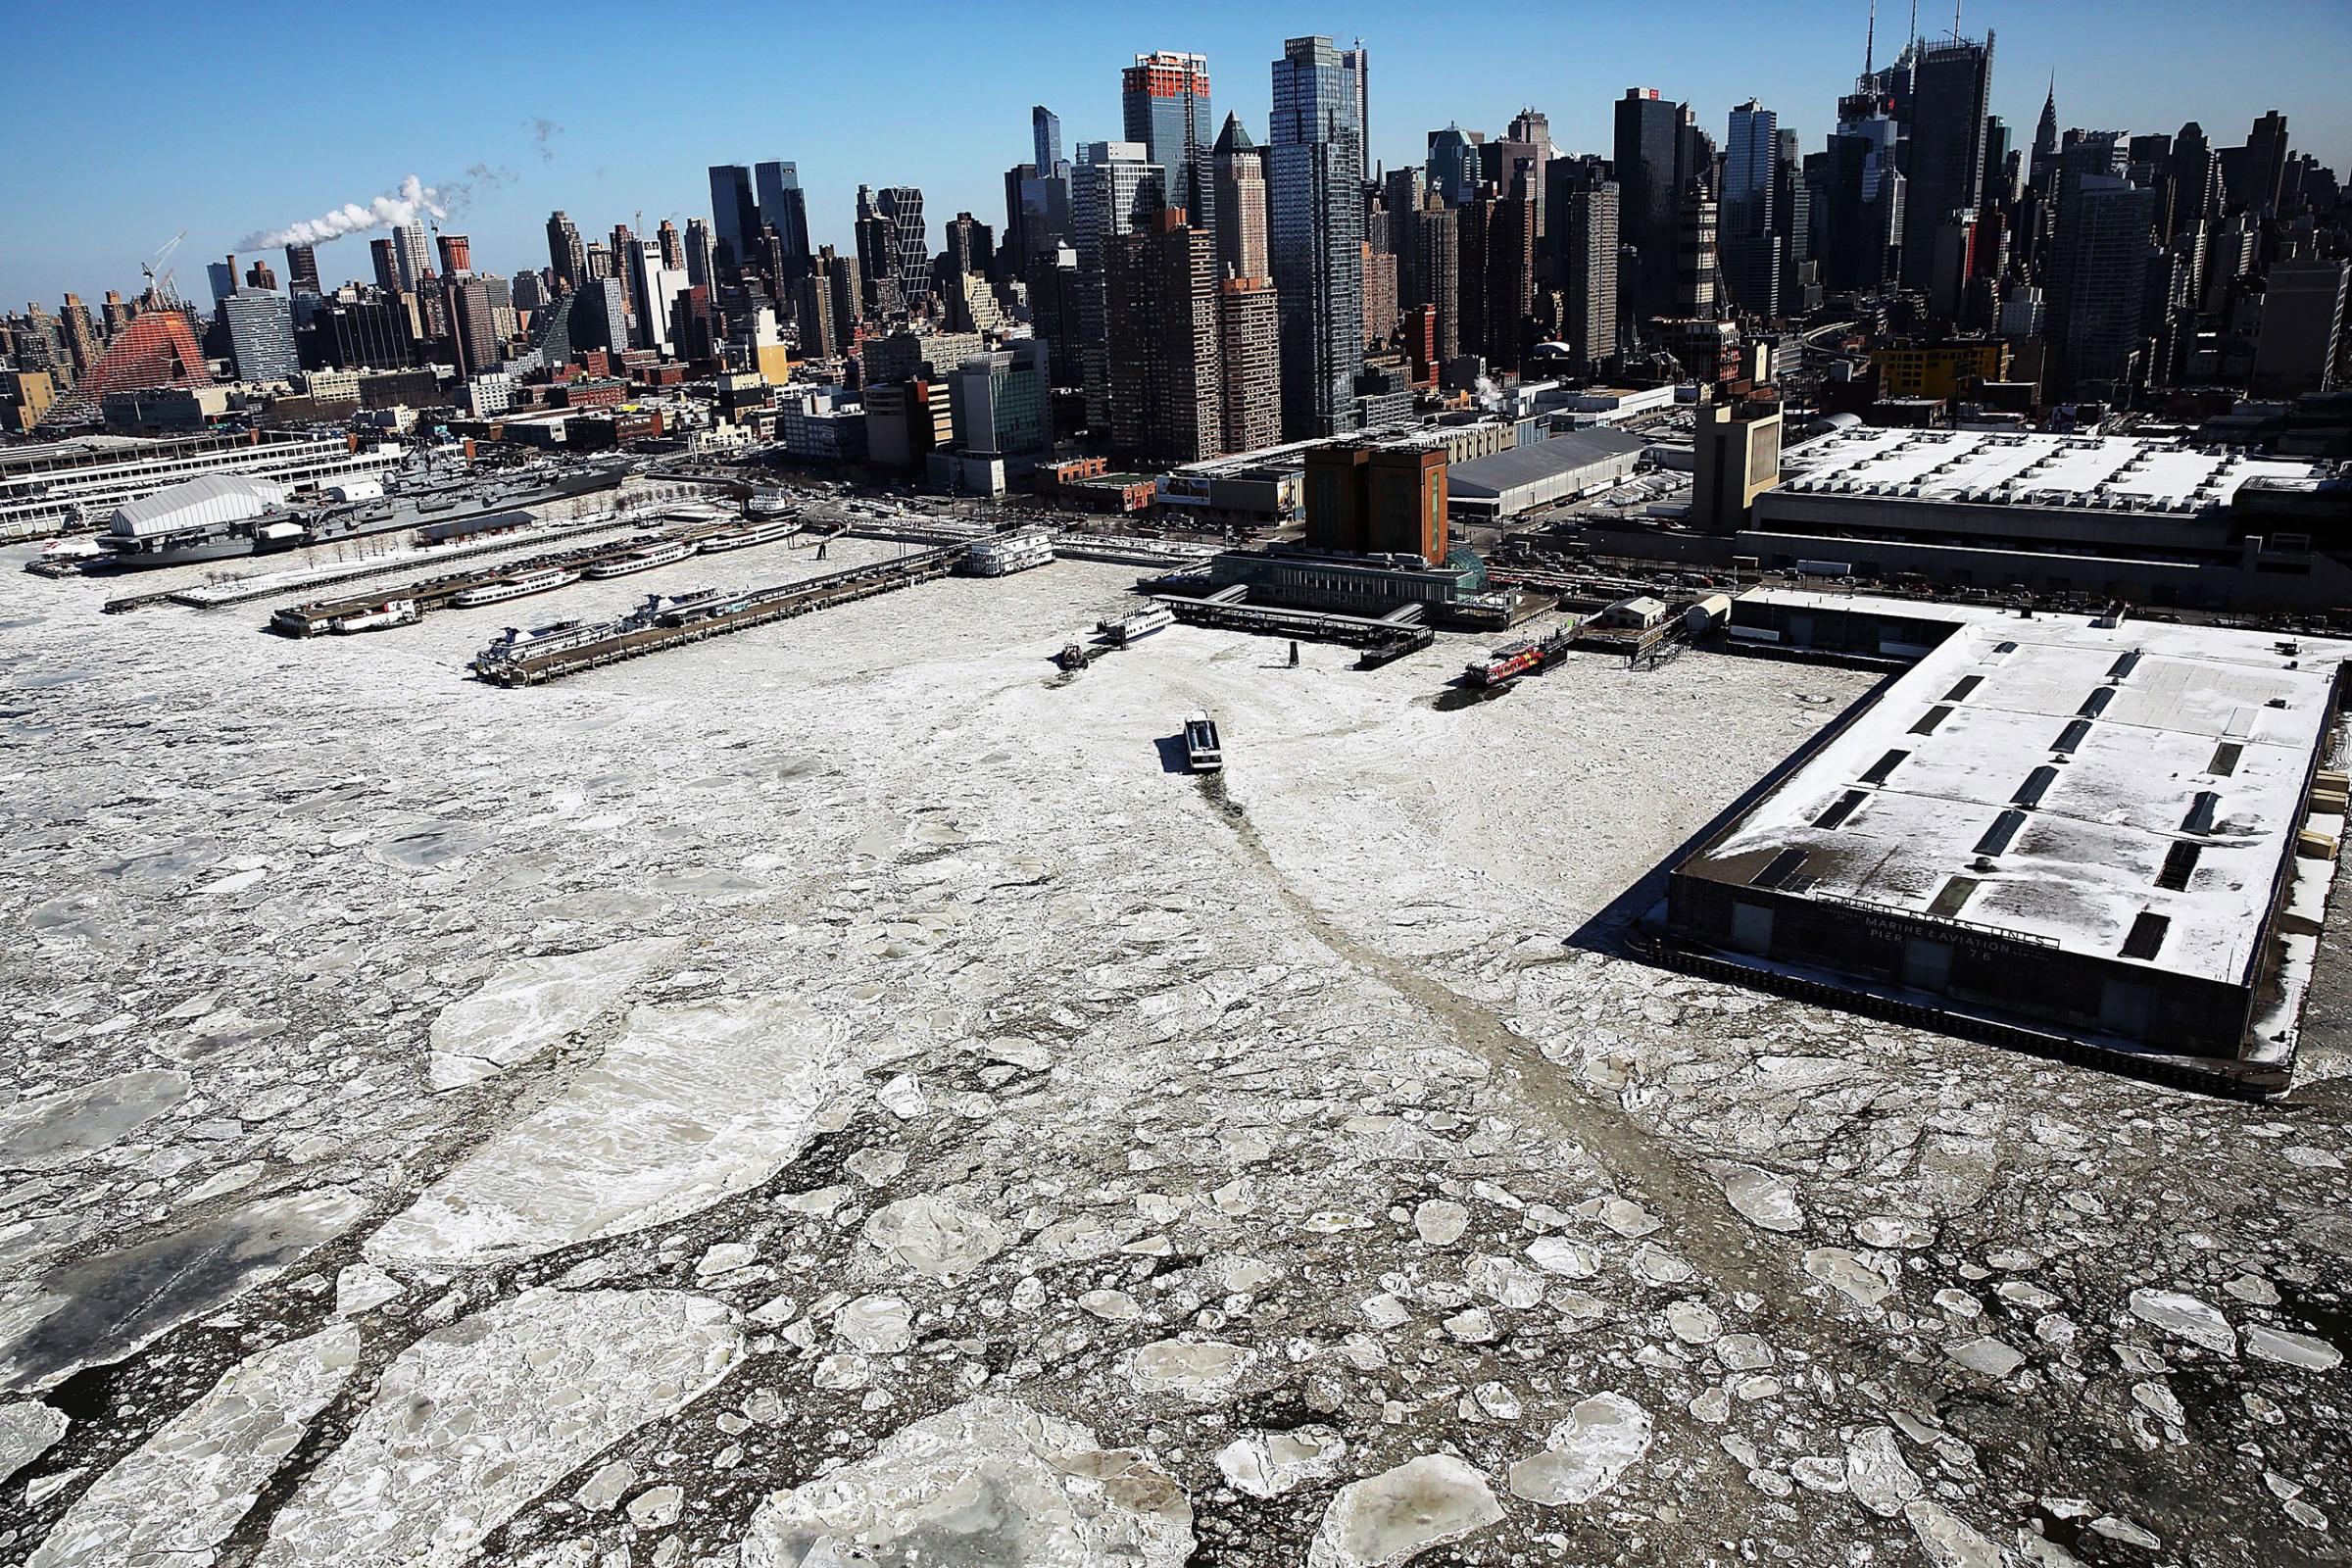 Ice floes are viewed along the Hudson River in Manhattan on a frigidly cold day. Feb. 20, 2015. Much of the East Coast and Western United States experienced unusually cold weather in the Winter 2015, with temperatures in the teens and the wind chill factor making it feel well below zero.